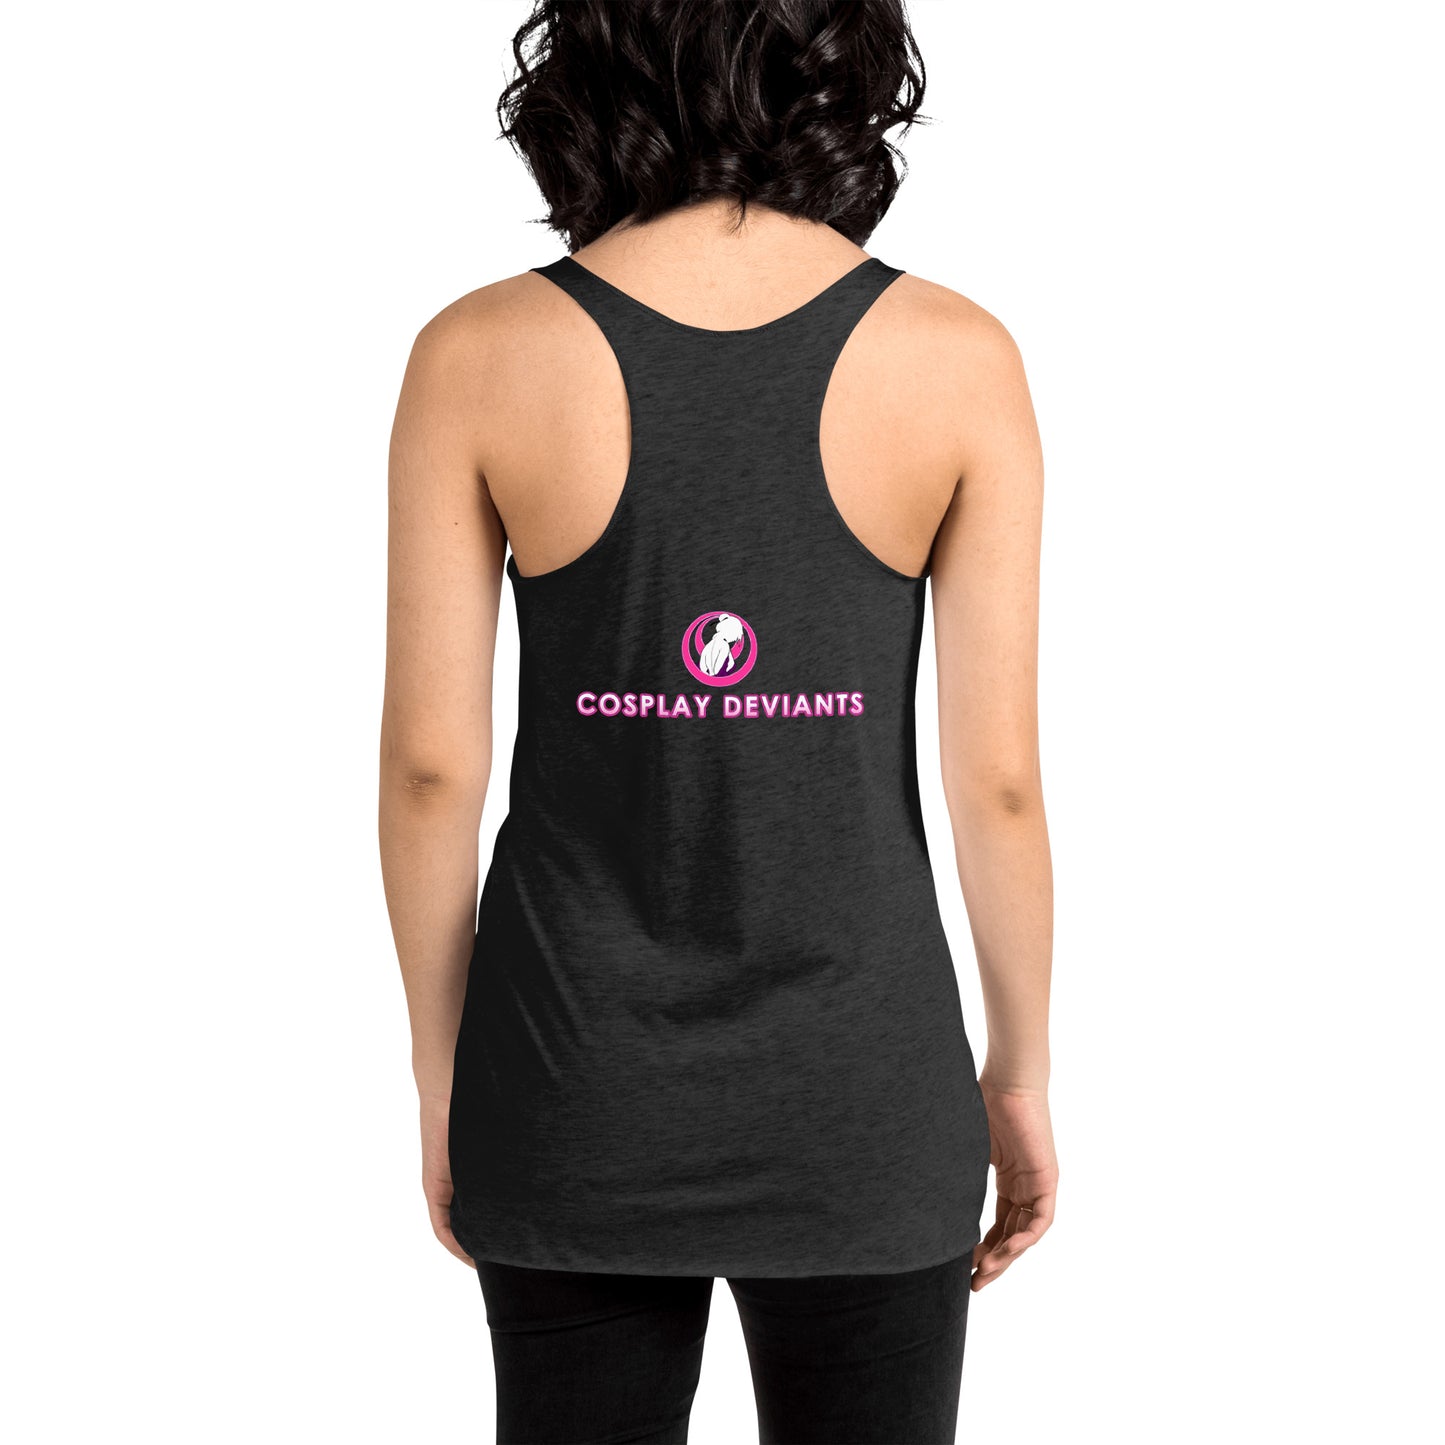 "One of Those" Racerback Tank